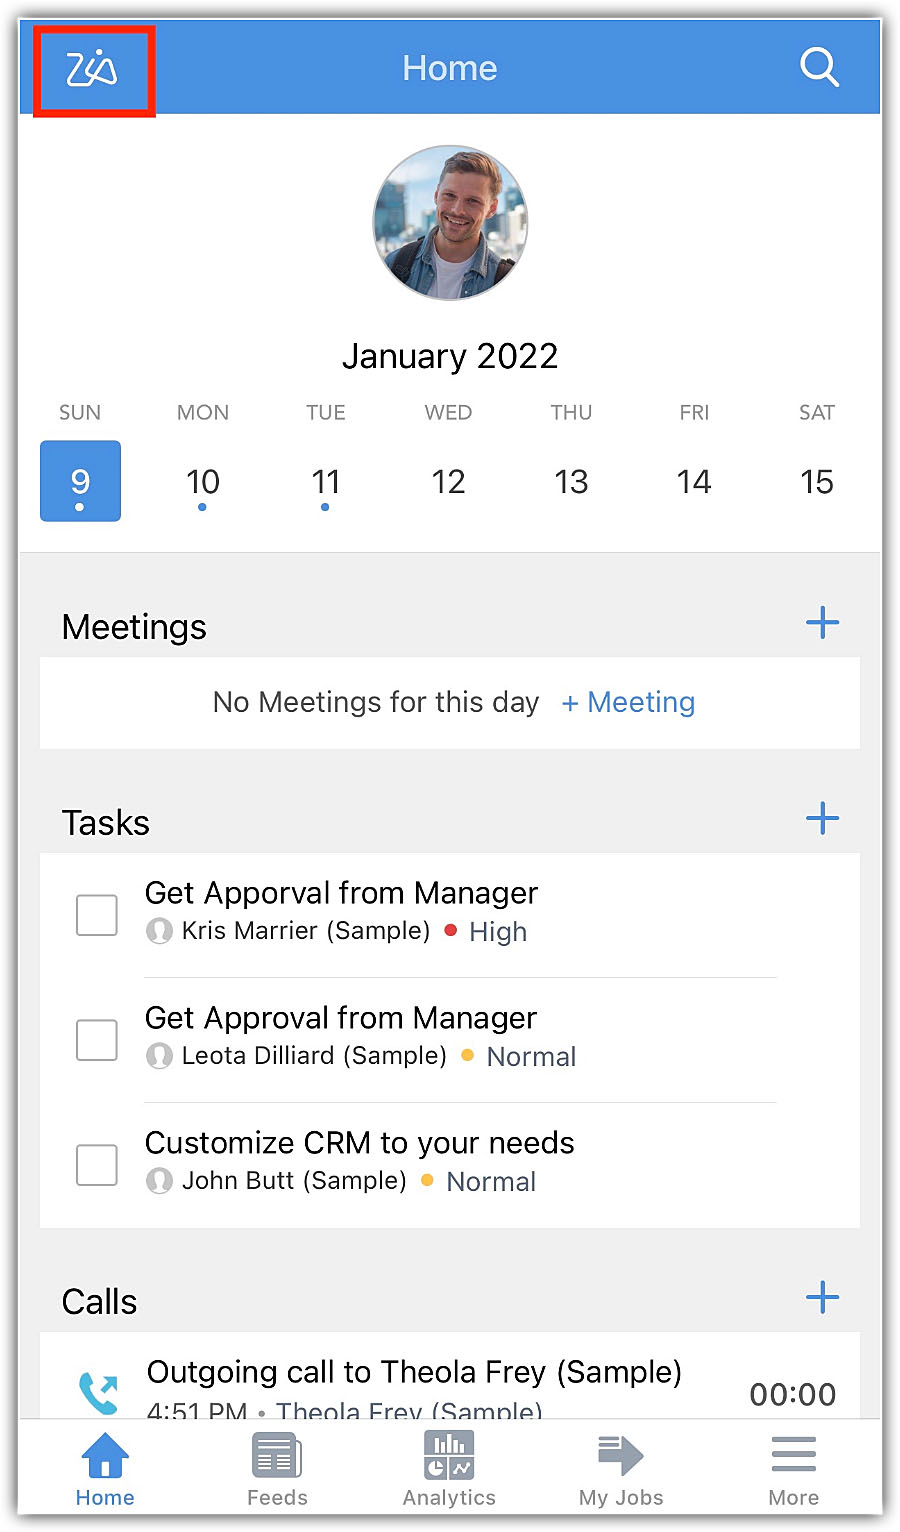 Zoho crm homepage showing tasks, meetings, and calls.